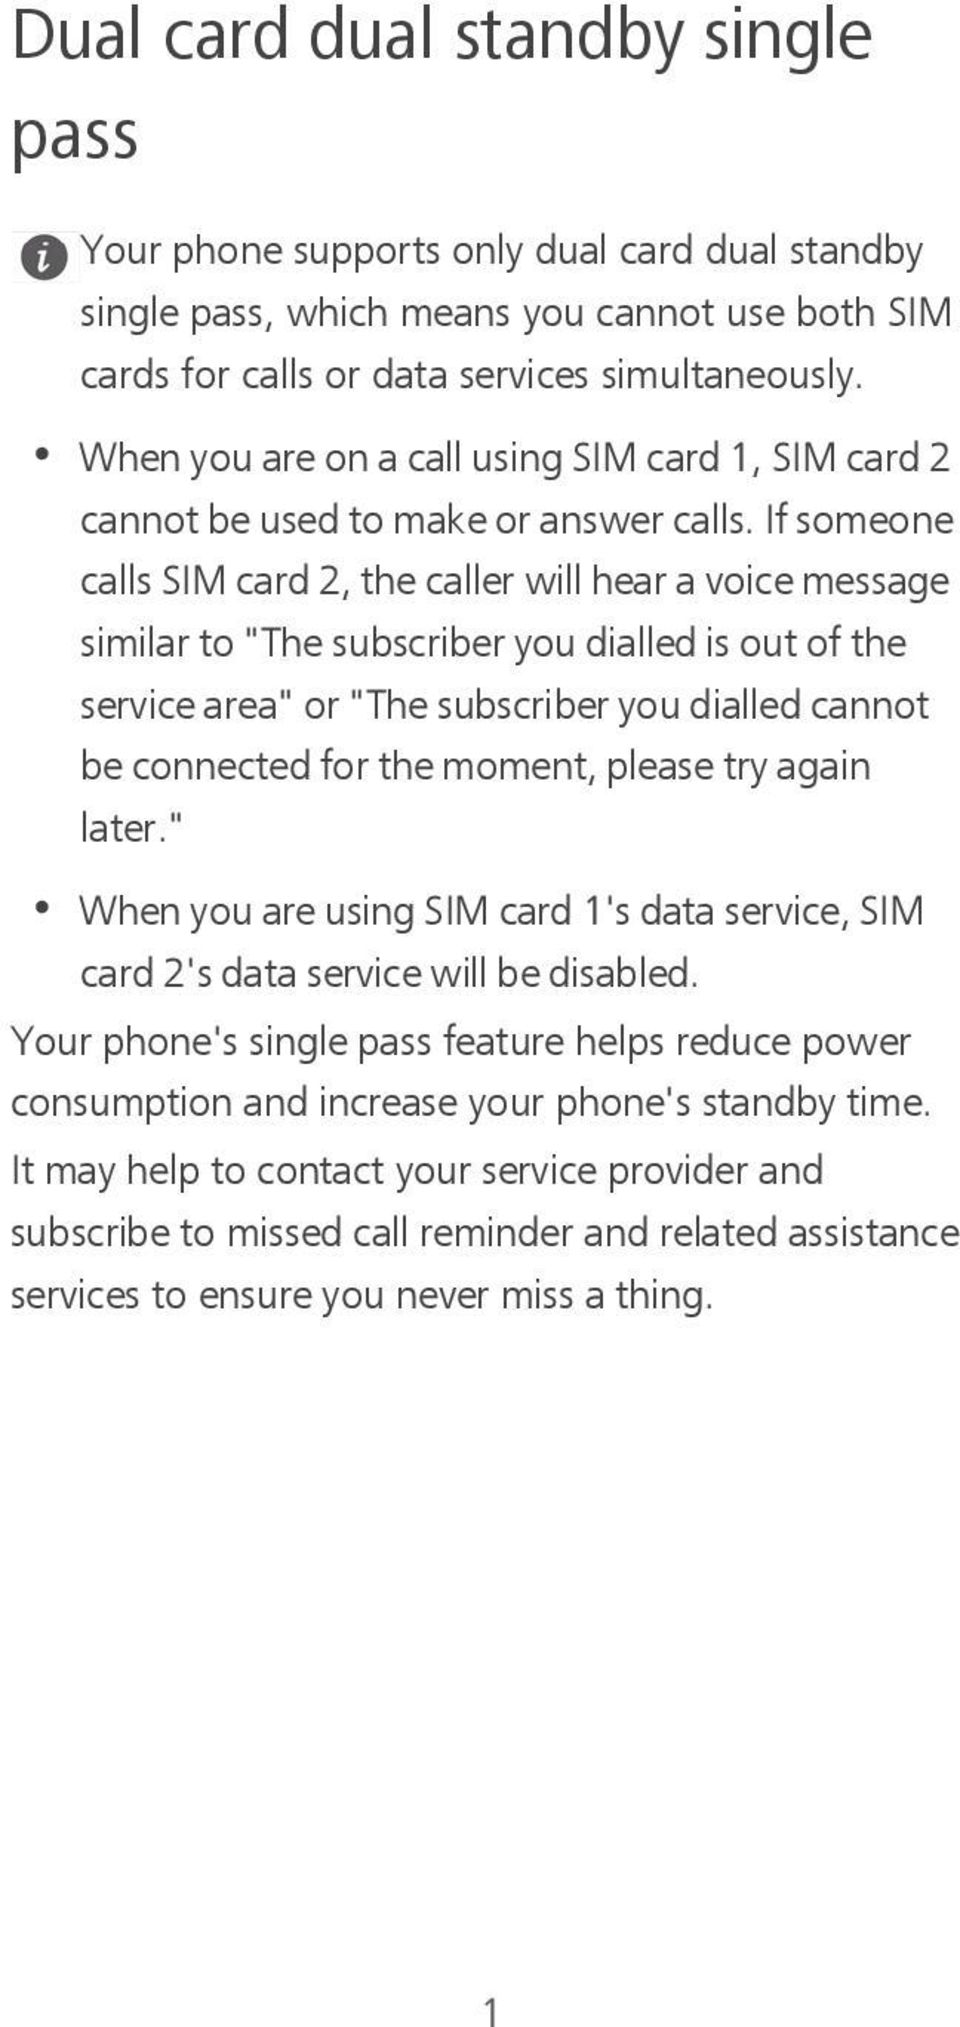 If someone calls SIM card 2, the caller will hear a voice message similar to "The subscriber you dialled is out of the service area" or "The subscriber you dialled cannot be connected for the moment,